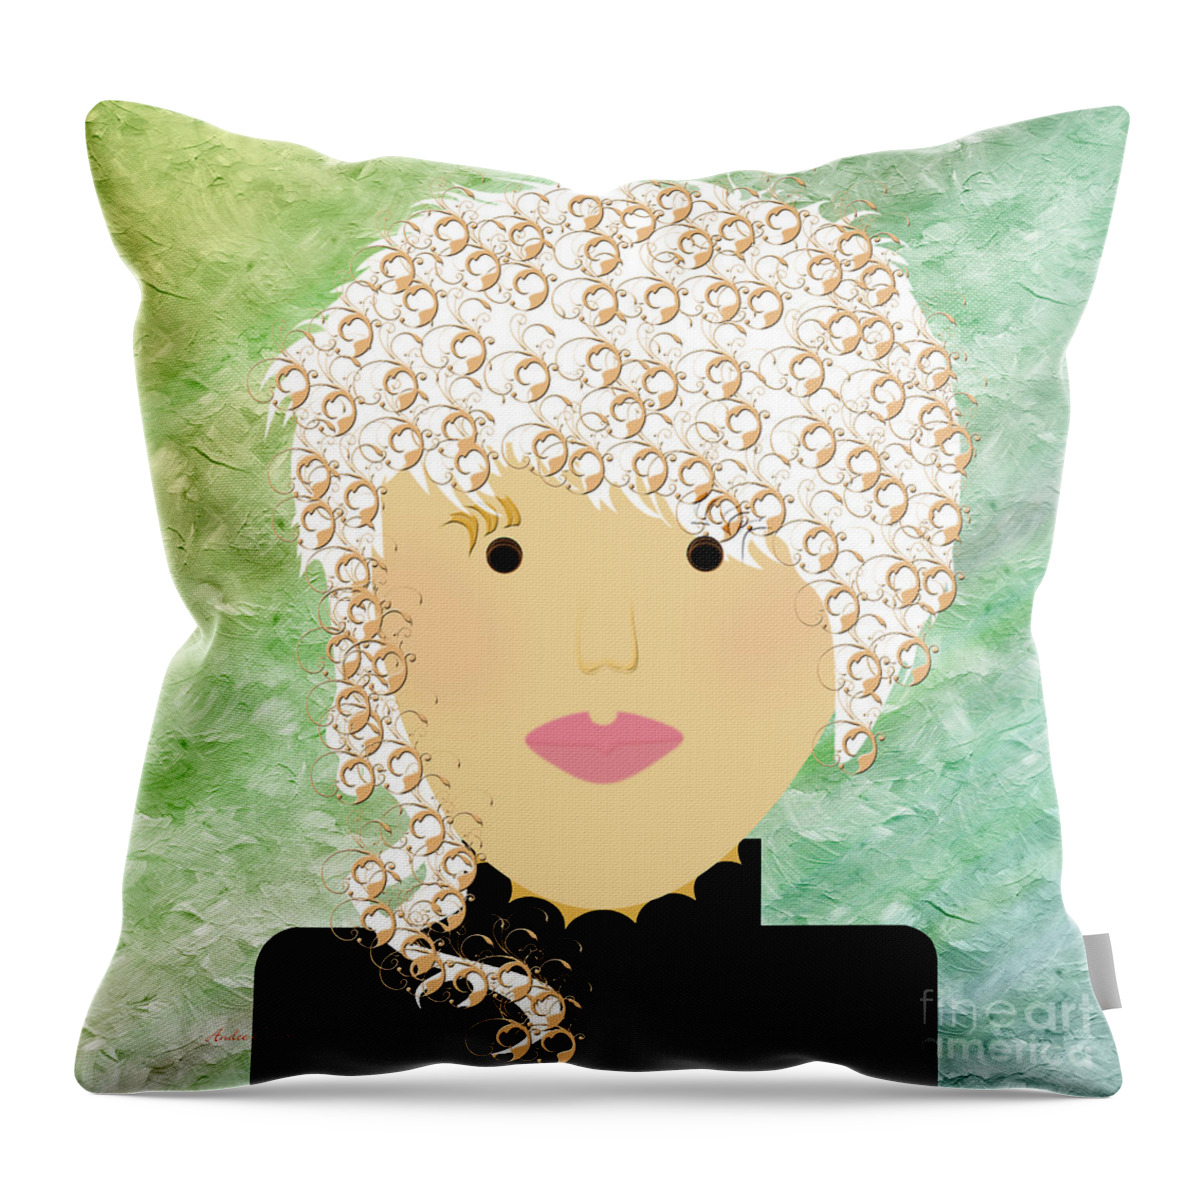 Andee Design Throw Pillow featuring the digital art Porcelain Doll 34 by Andee Design